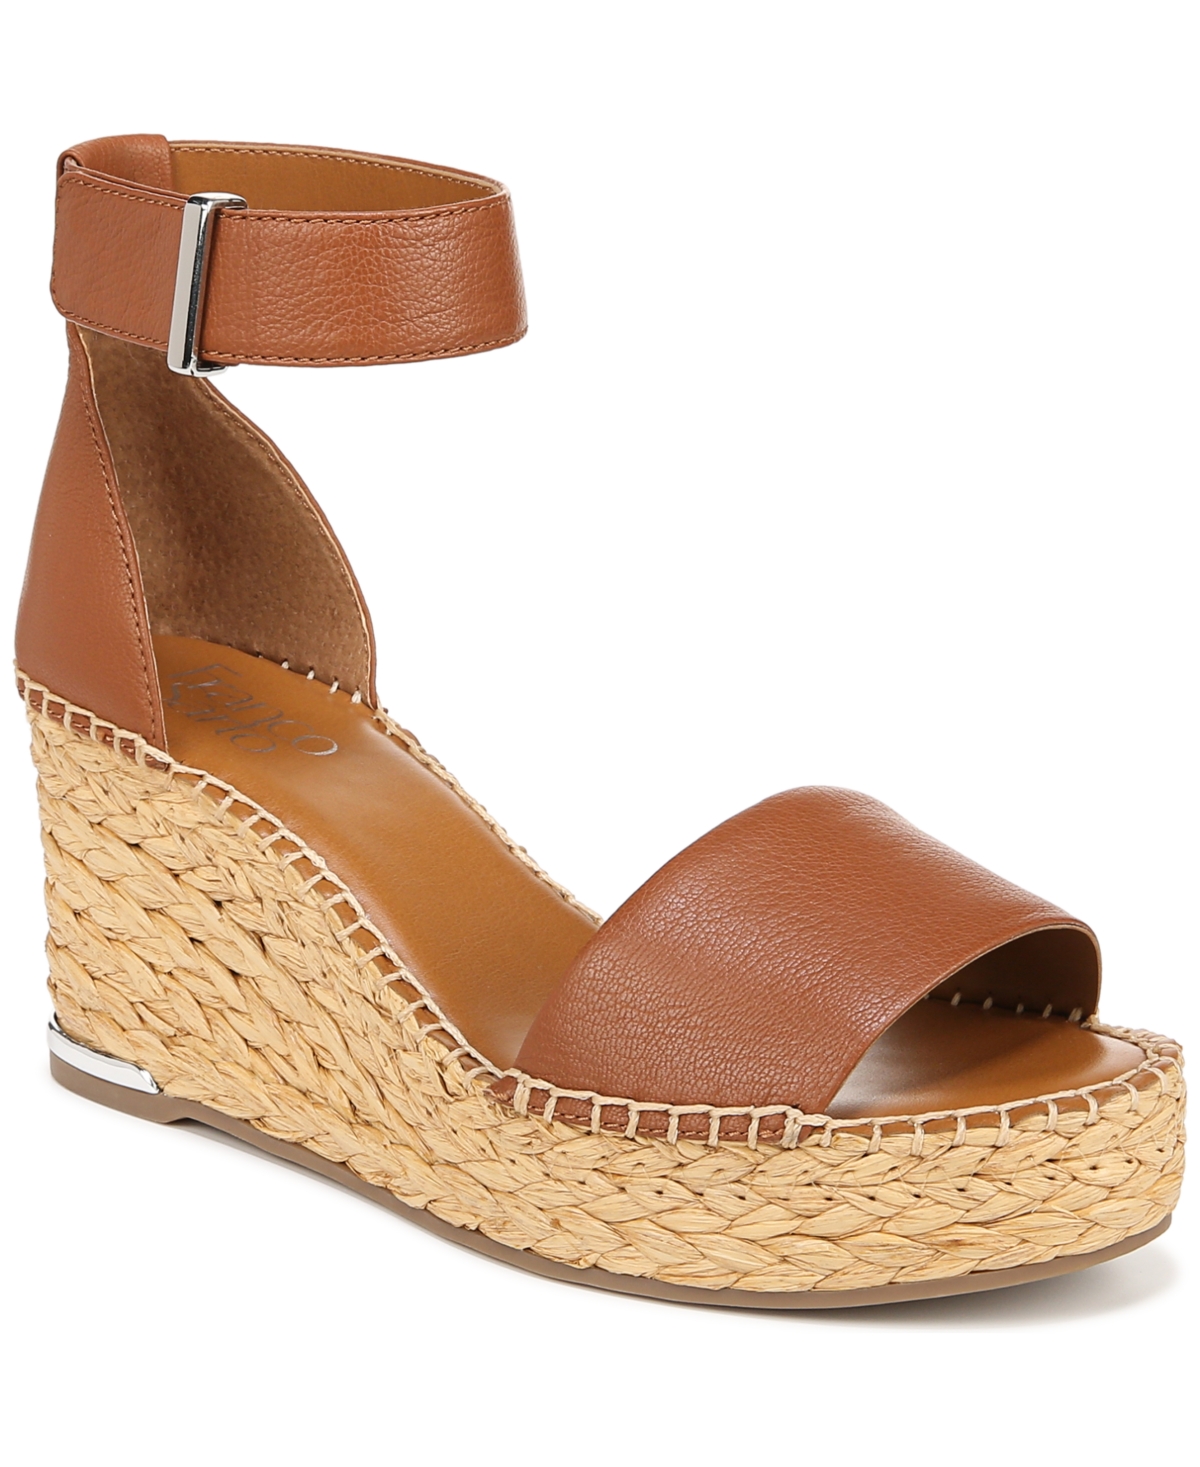 Franco Sarto Clemens Espadrille Wedge Sandals In Cognac Brown Leather